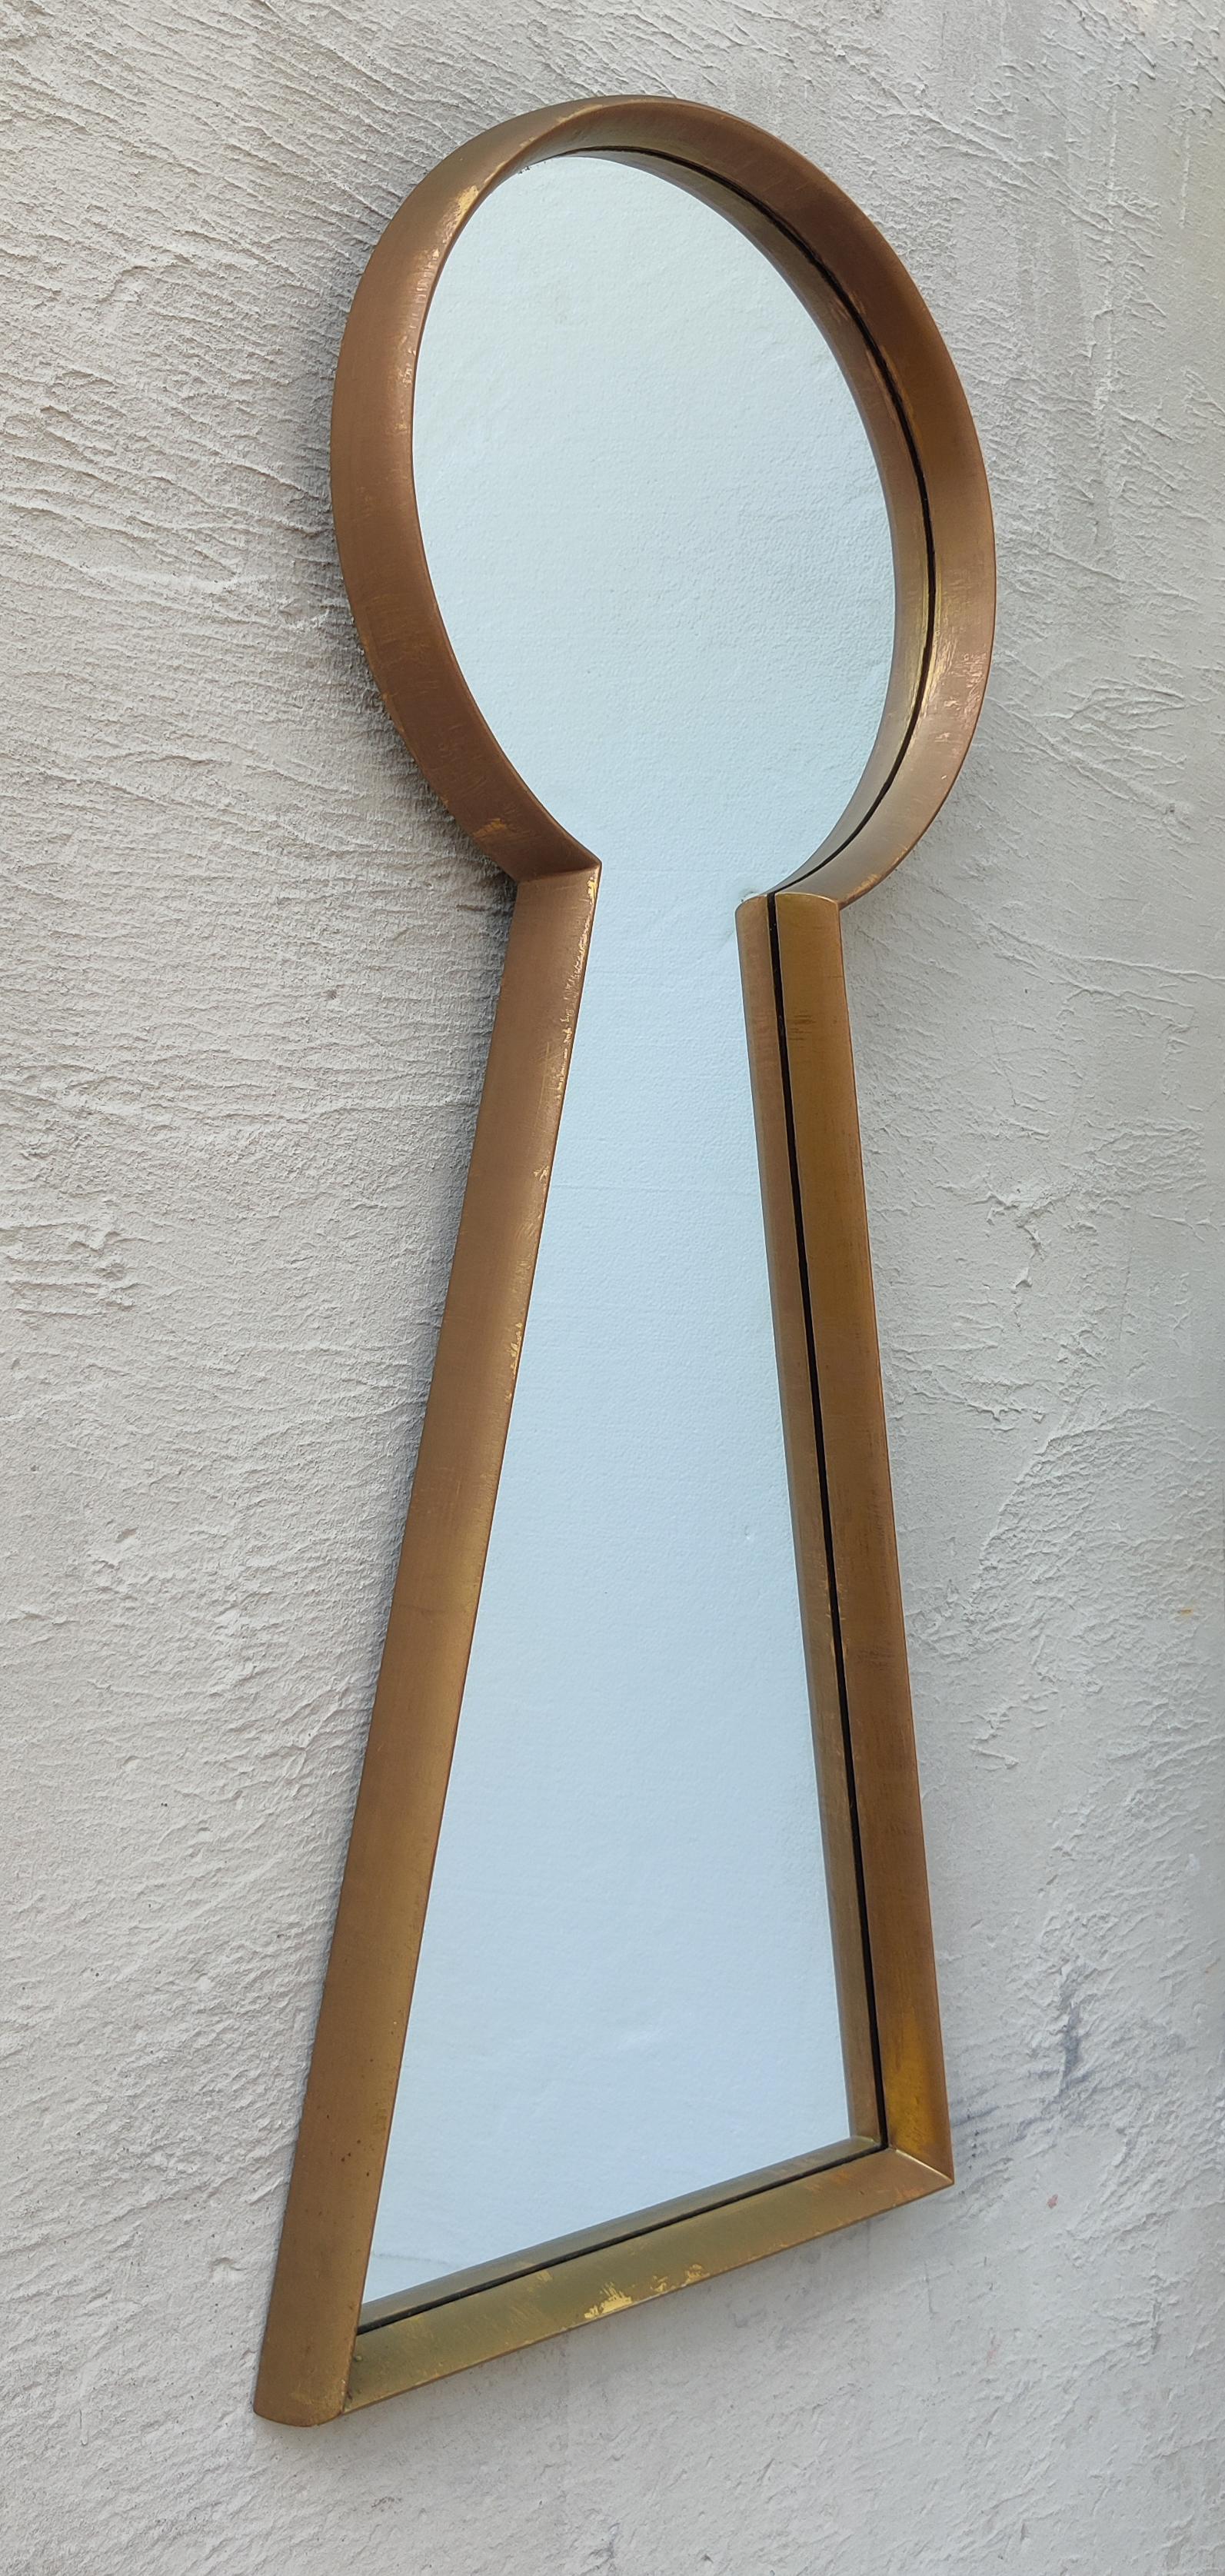 In the style of manufacturer LaBarge, this large mirror features a well-proportioned keyhole shape with a carved and gilt wooden frame. A handsome accent piece for any modern home or hallway. Dated 1962. 

In good vintage and original condition. No